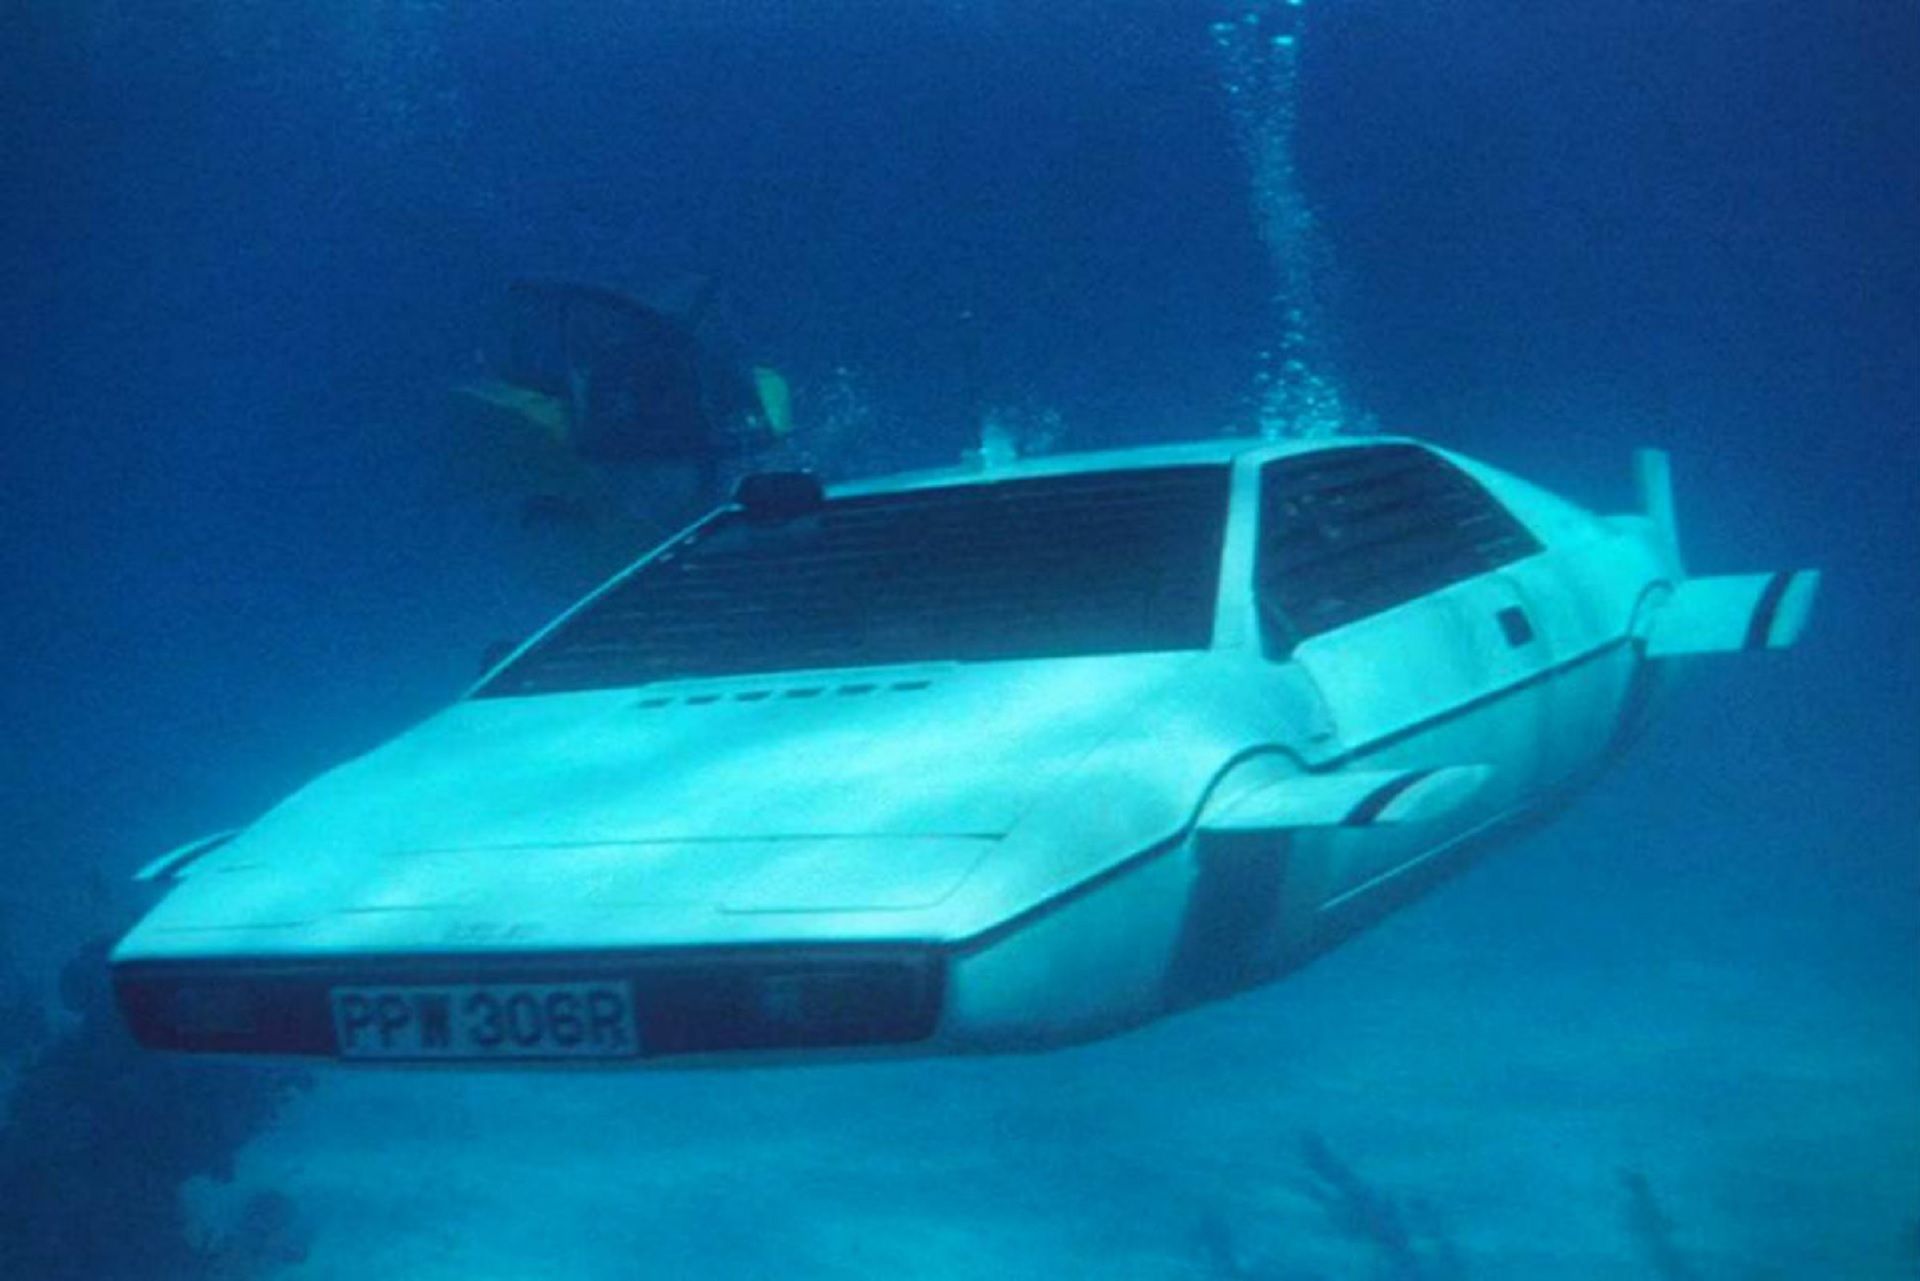 Best Bond Cars The Best Cars From The Films image 2